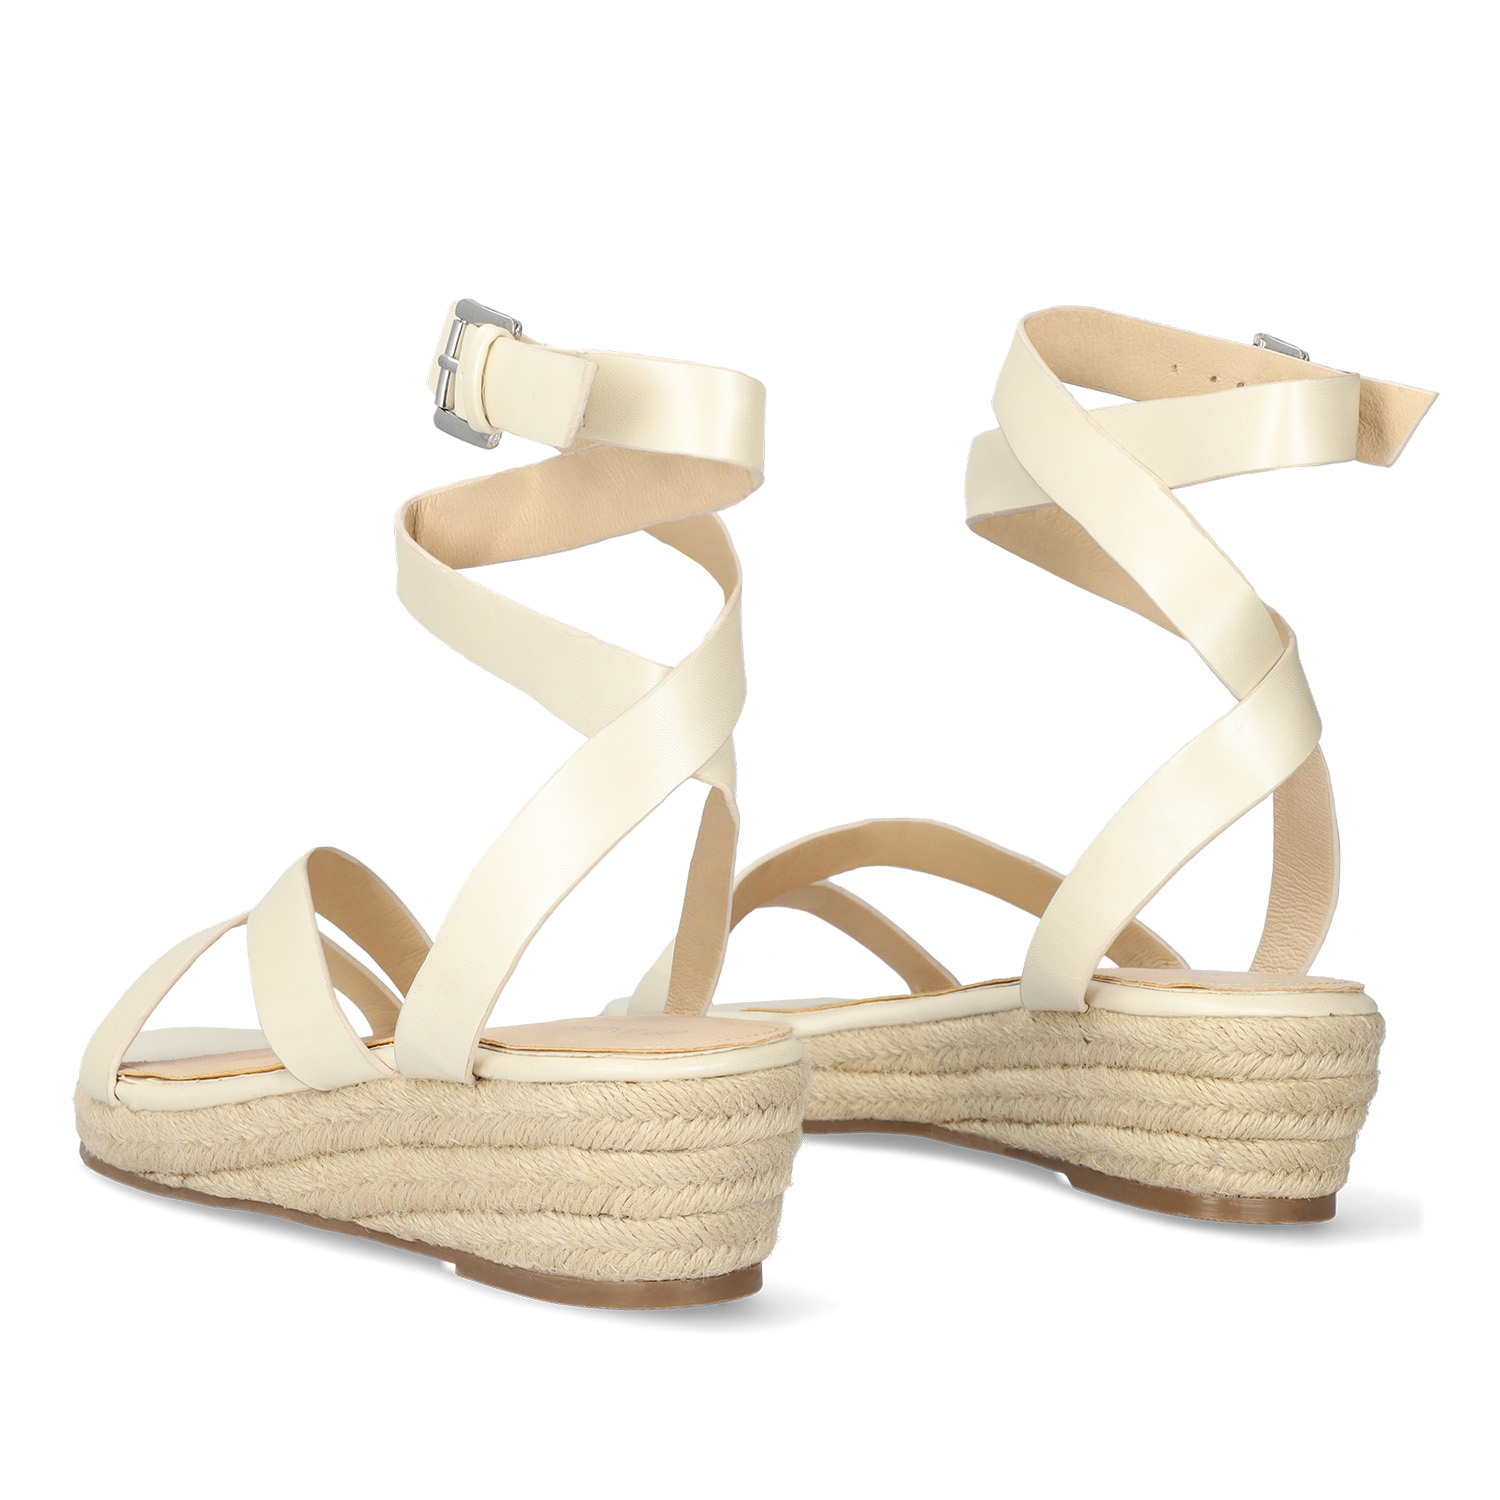 Beige faux leather sandals with jute wedge 